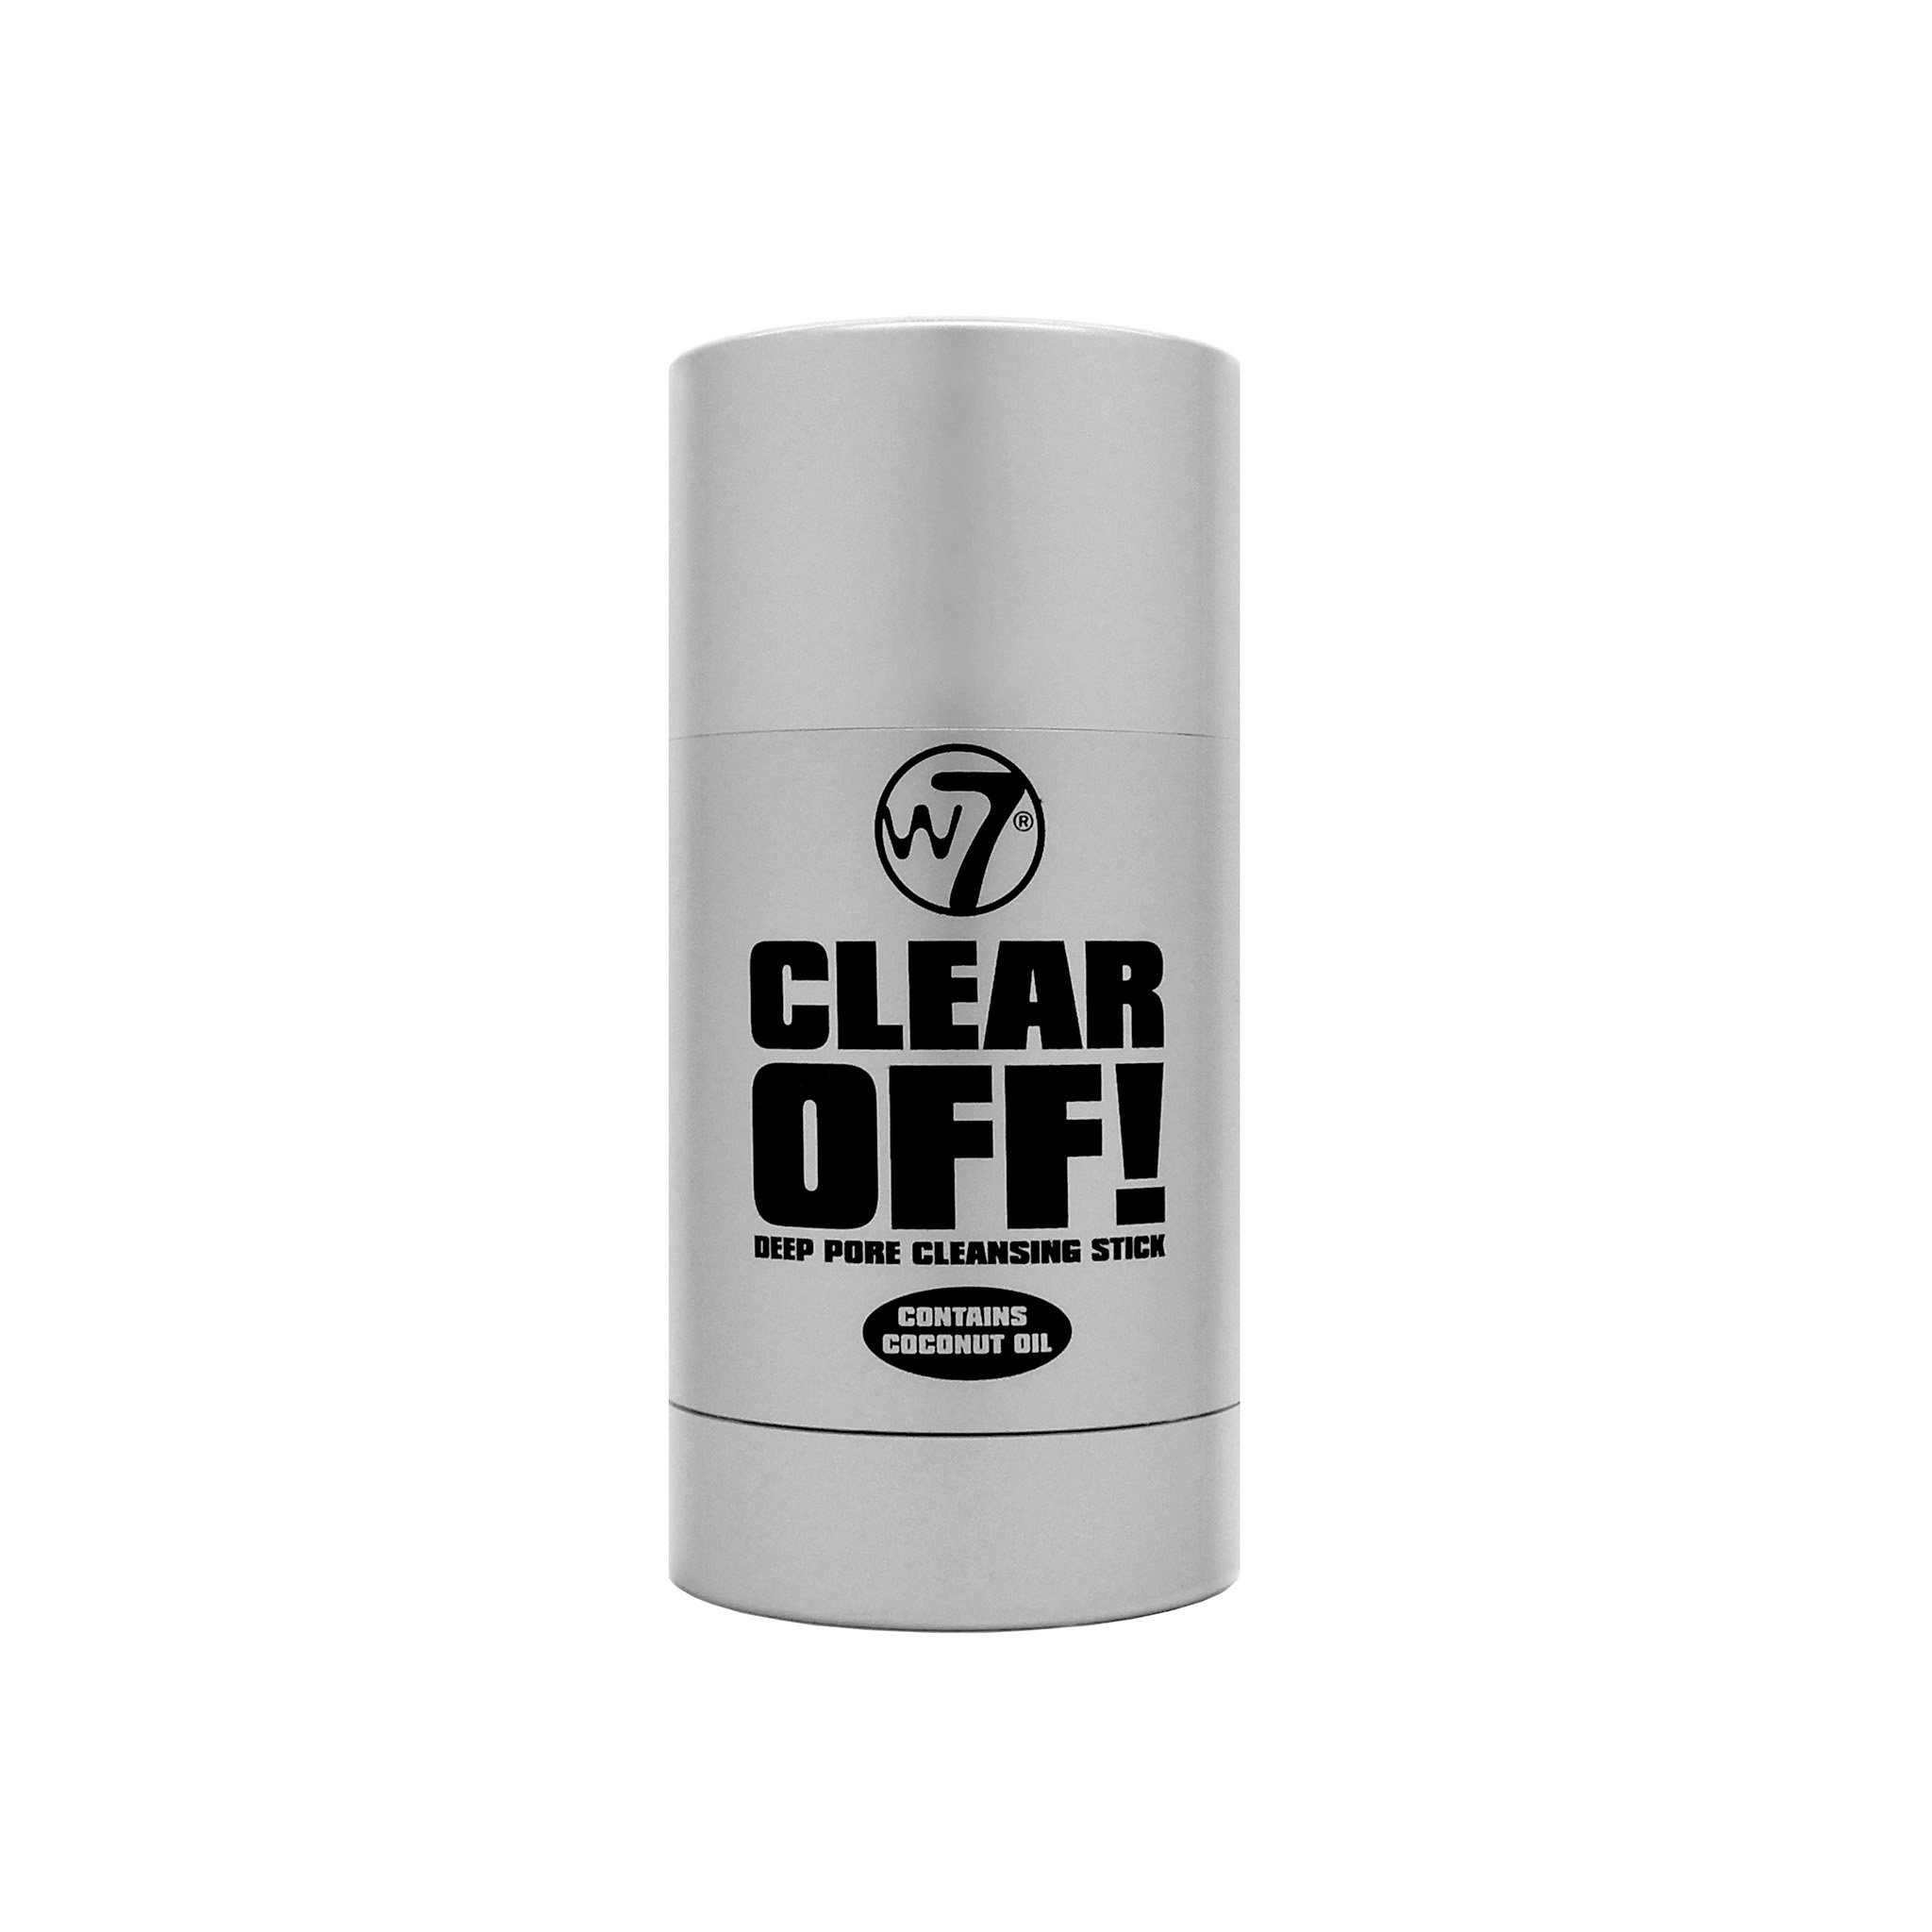 W7 Clear off Deep pore cleansing stick